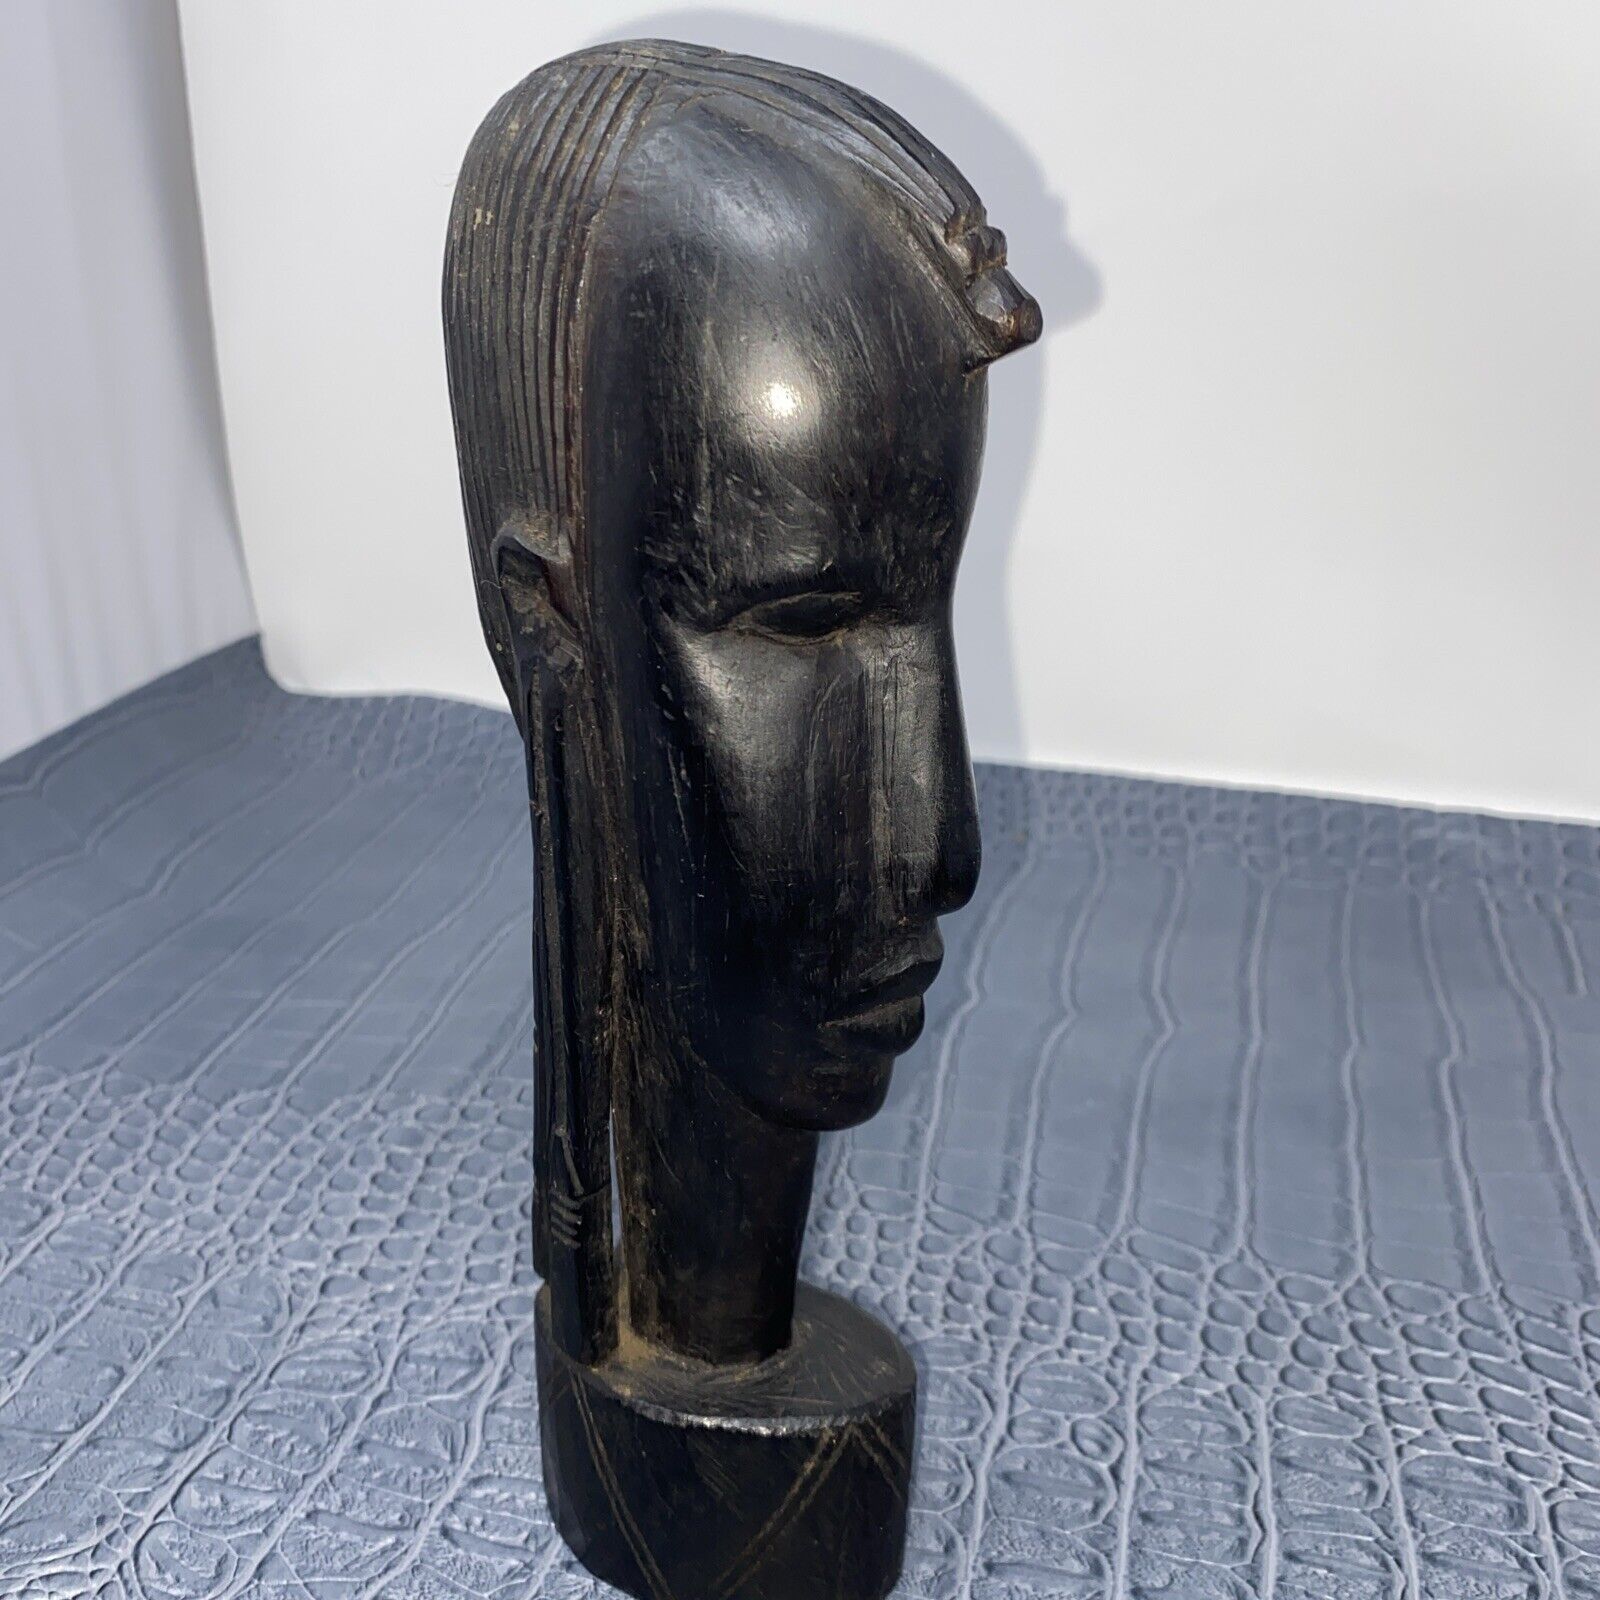 Vintage African Ebony Bust Hand Carved Solid Wood Sculpture Tribal Head 9”